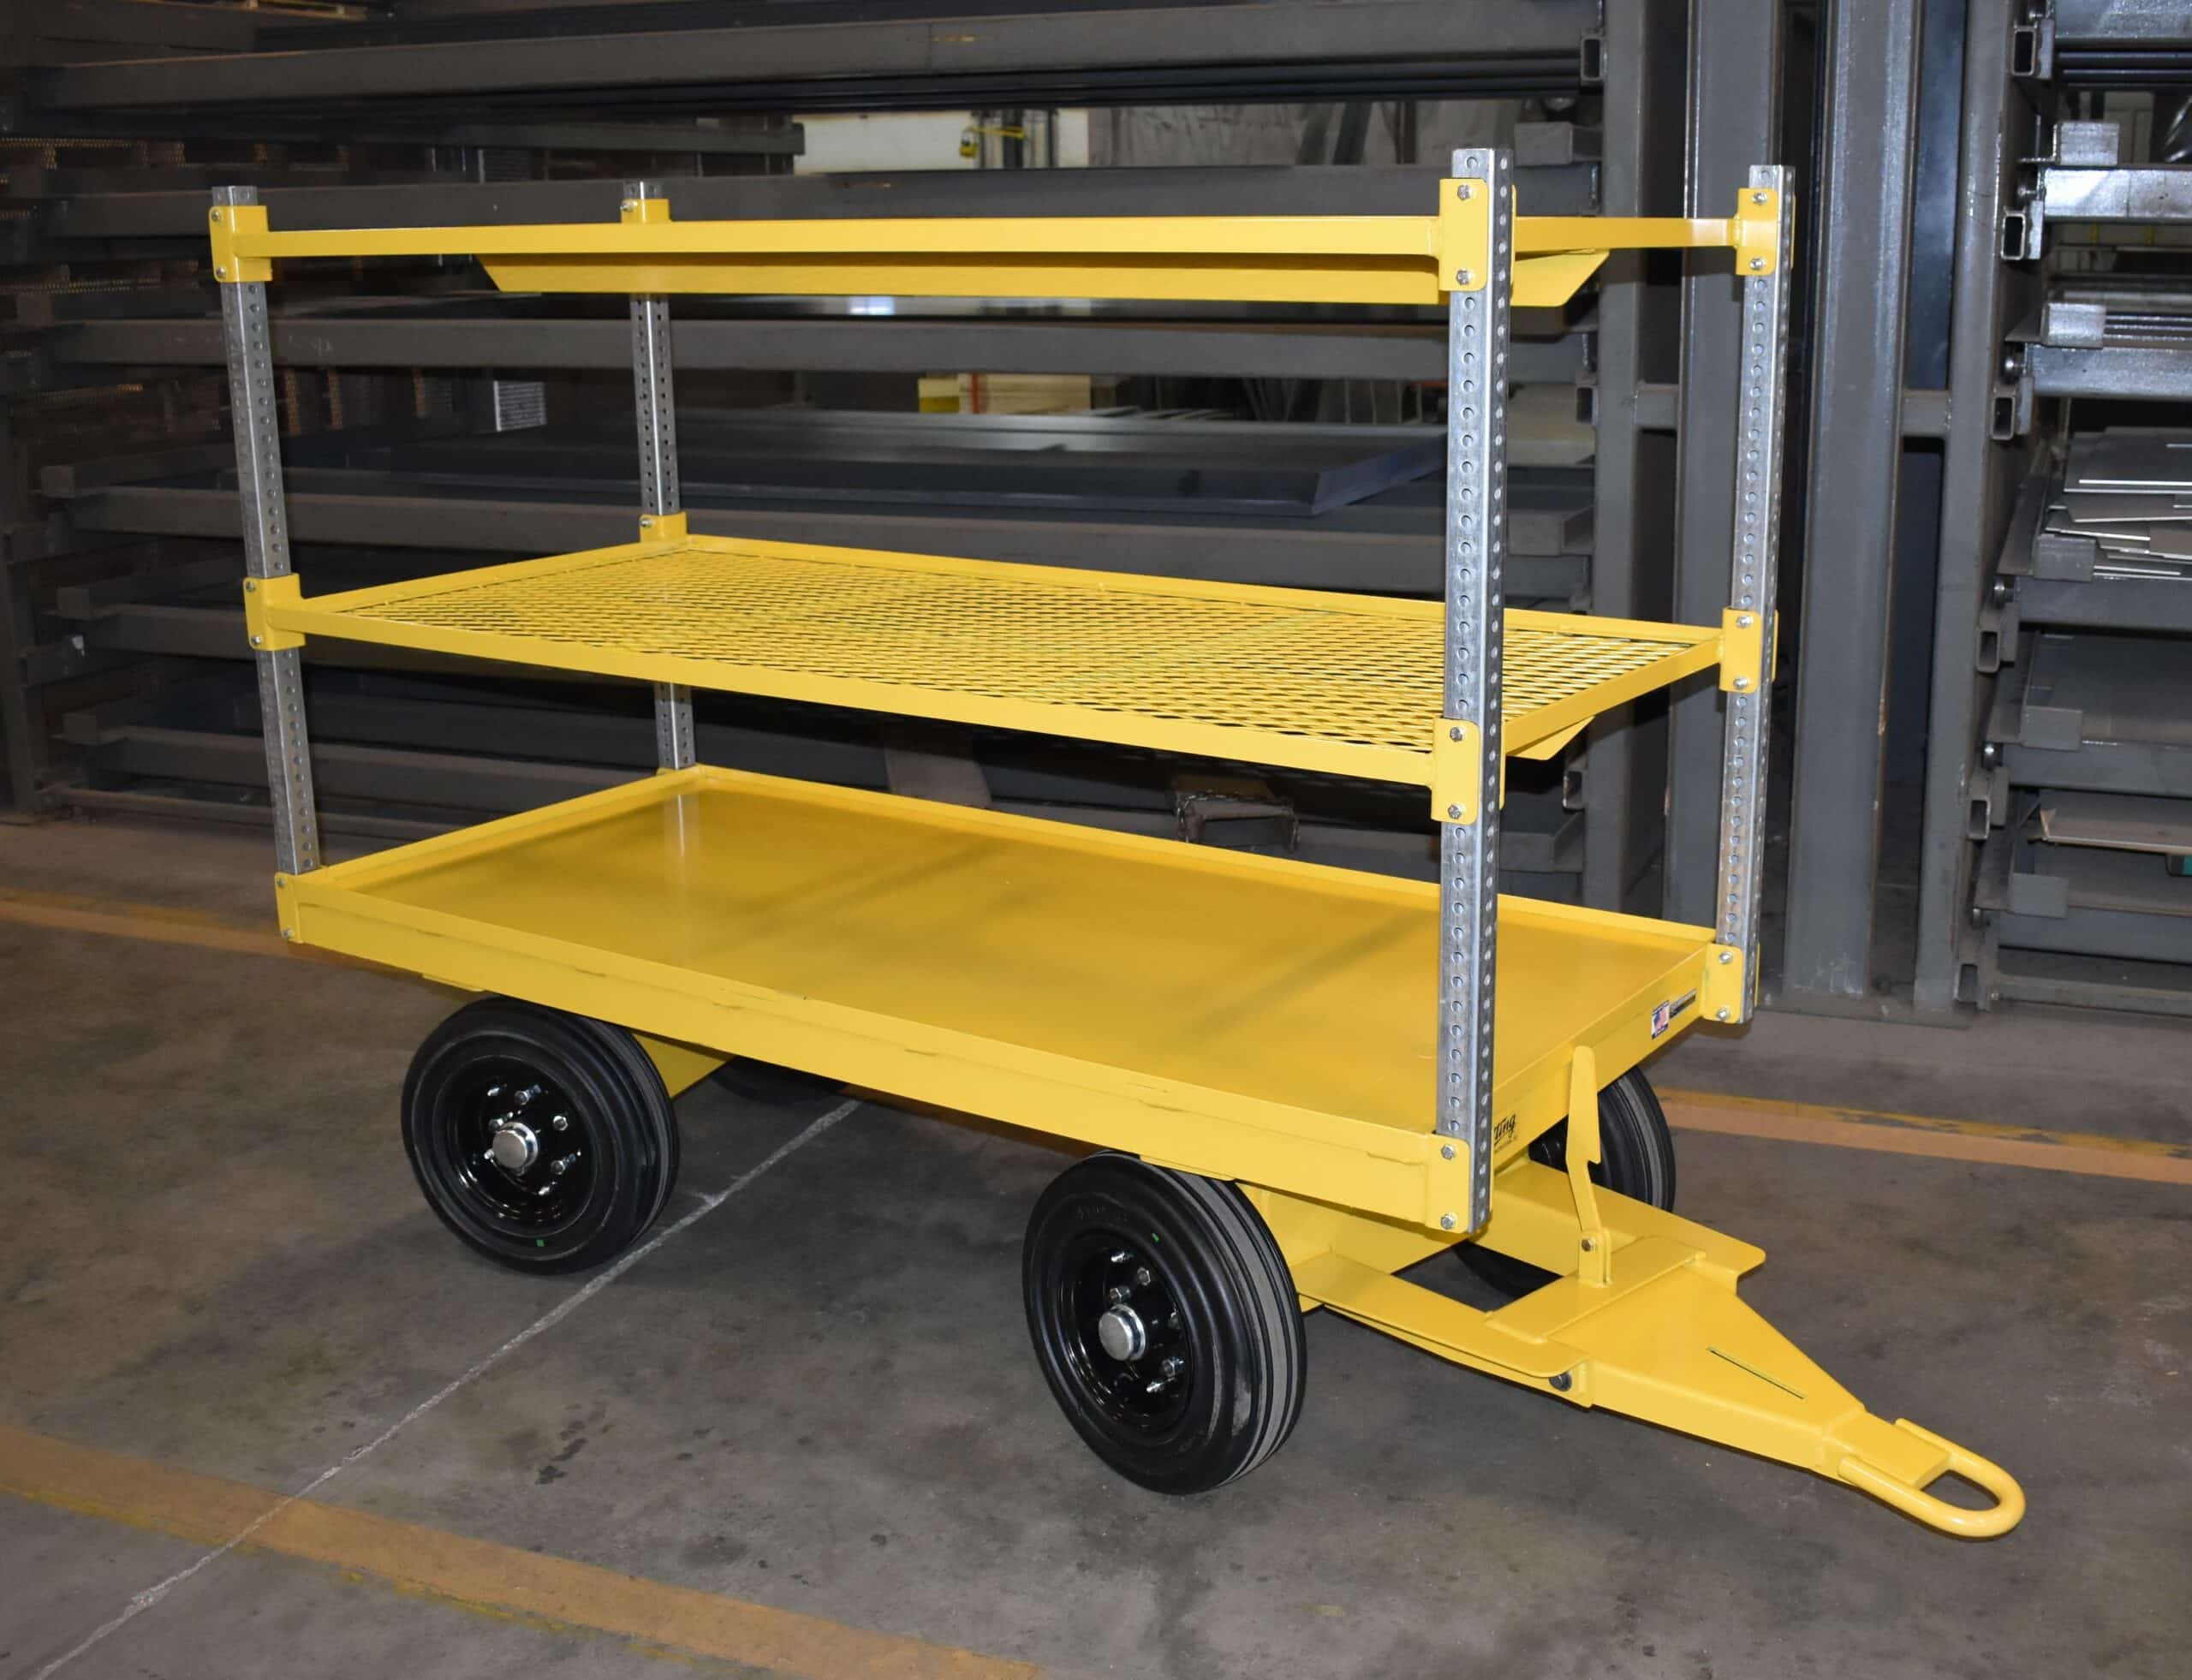 Productivity Freedom with the Nutting Adjustable Shelf Cart